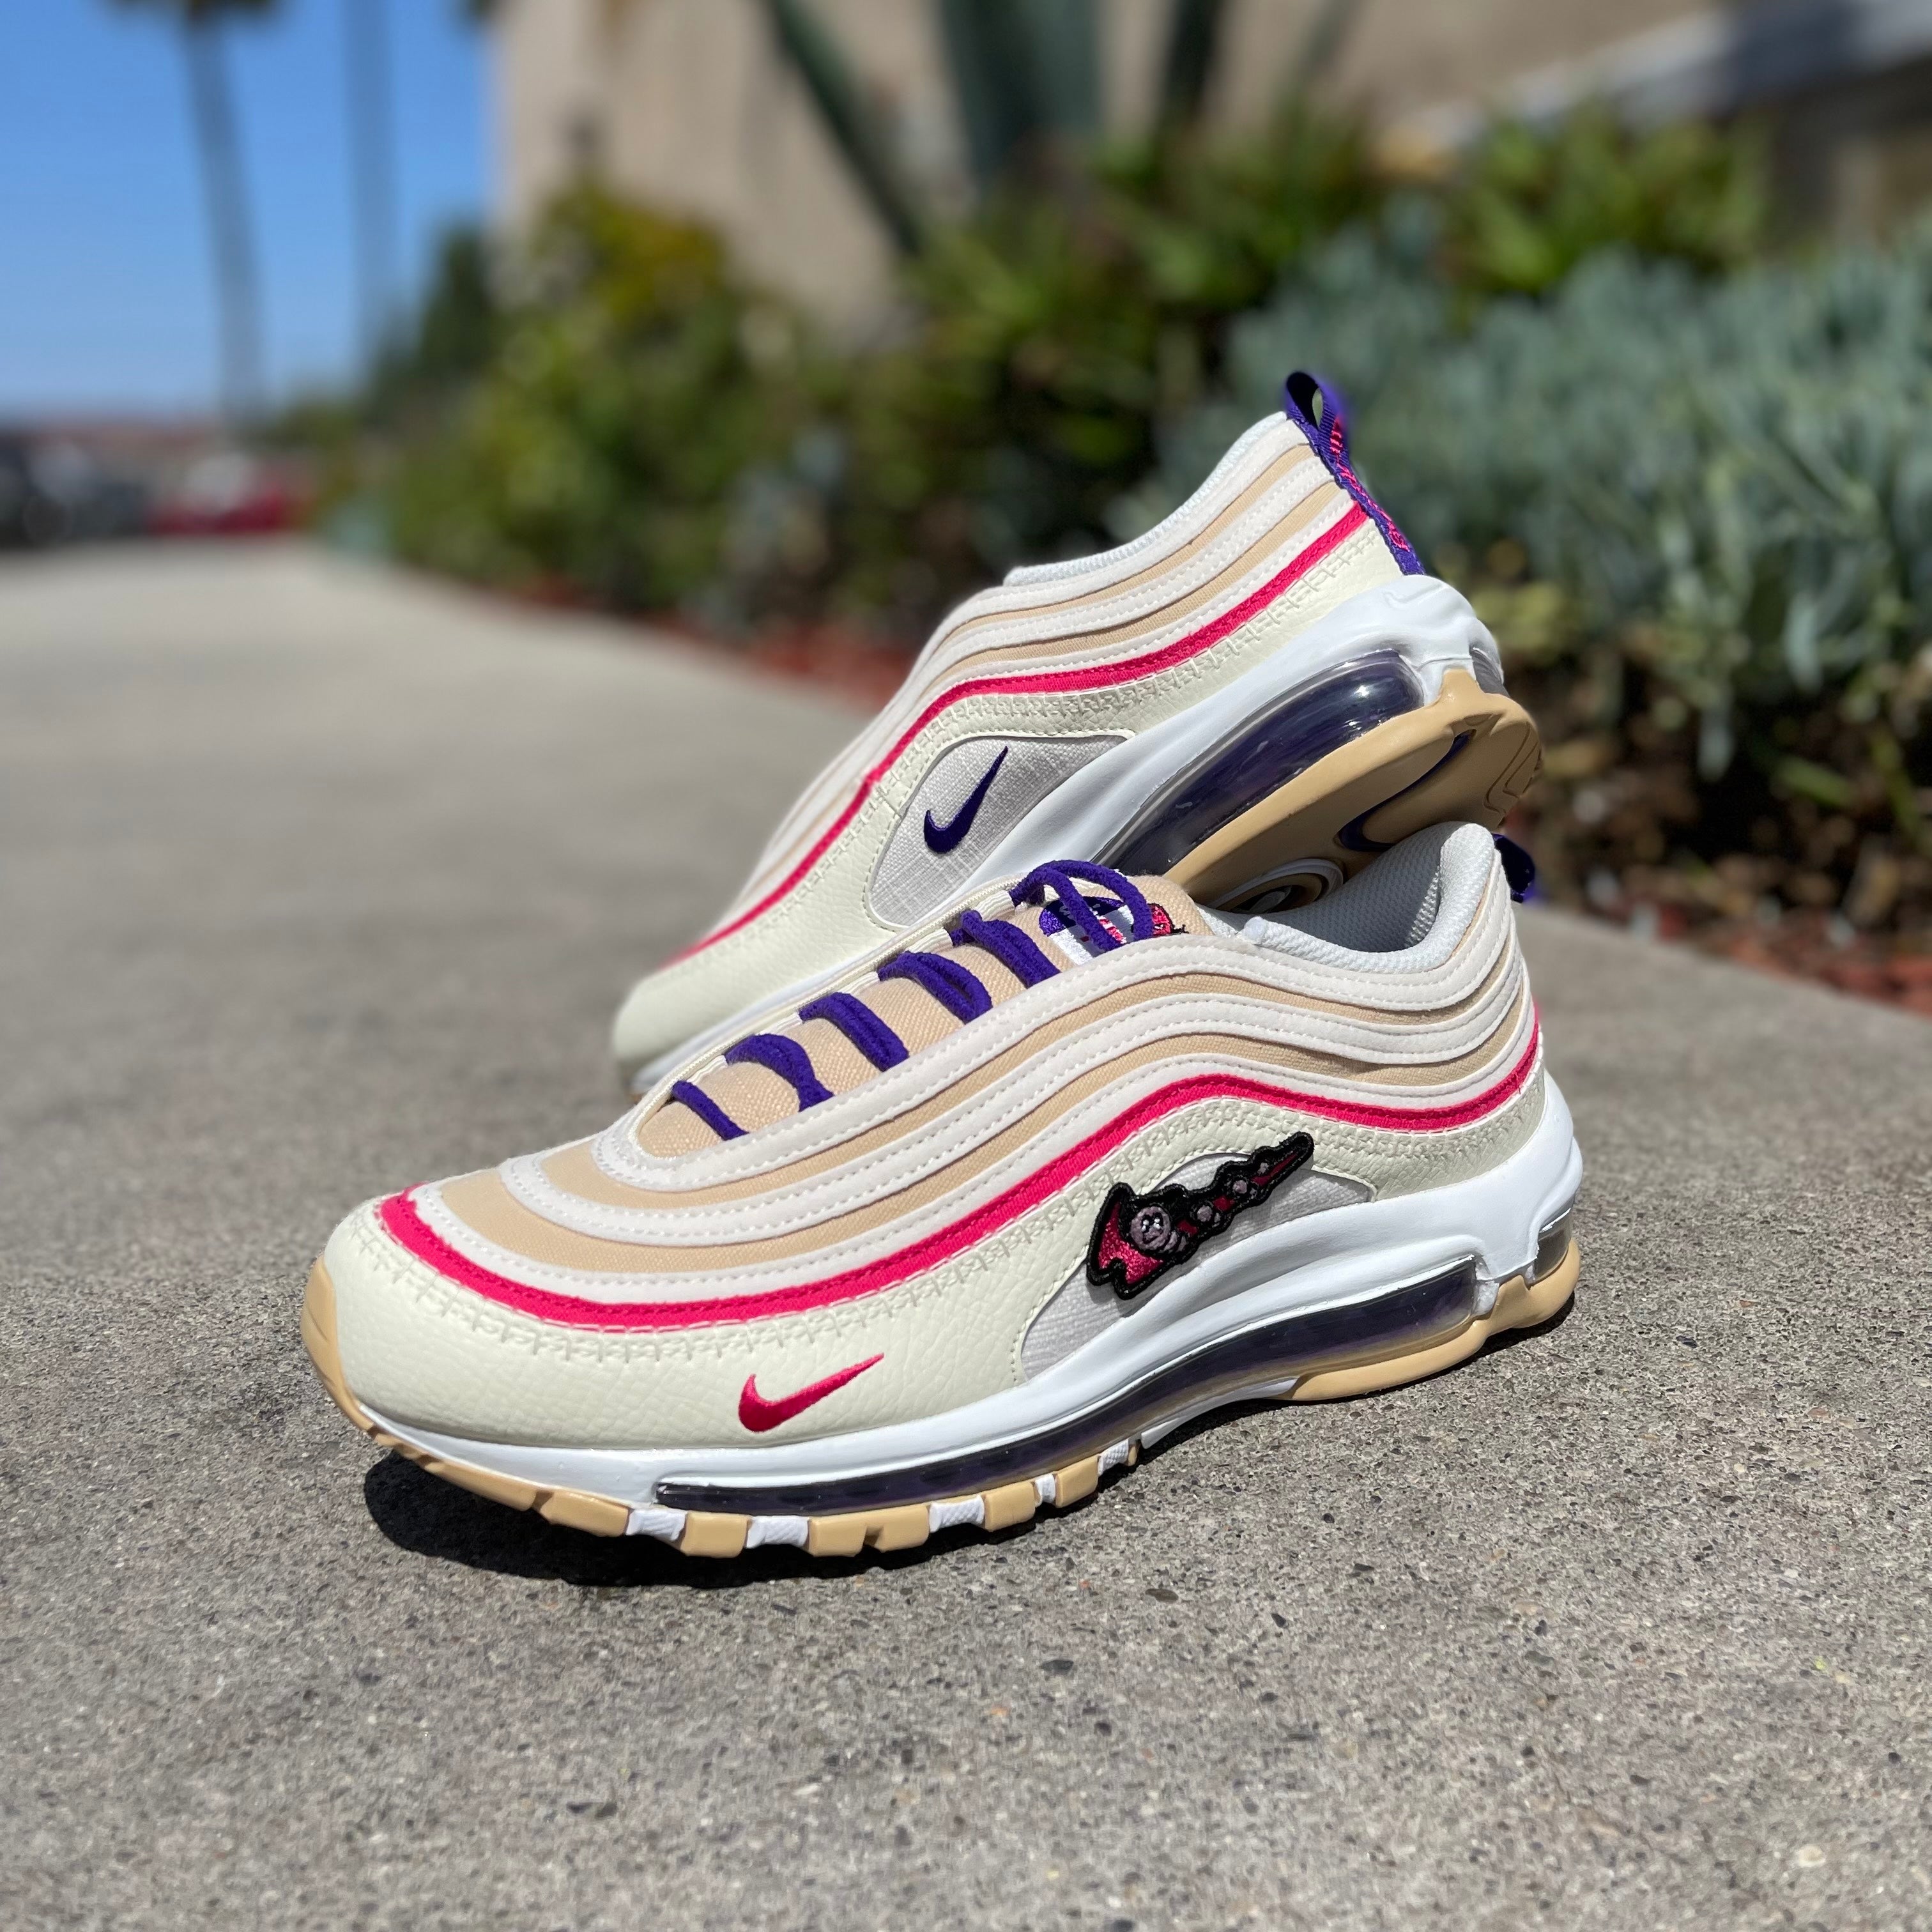 Nike Women's Air Max 97 Shoes in White, Size: 6 | DM8268-100